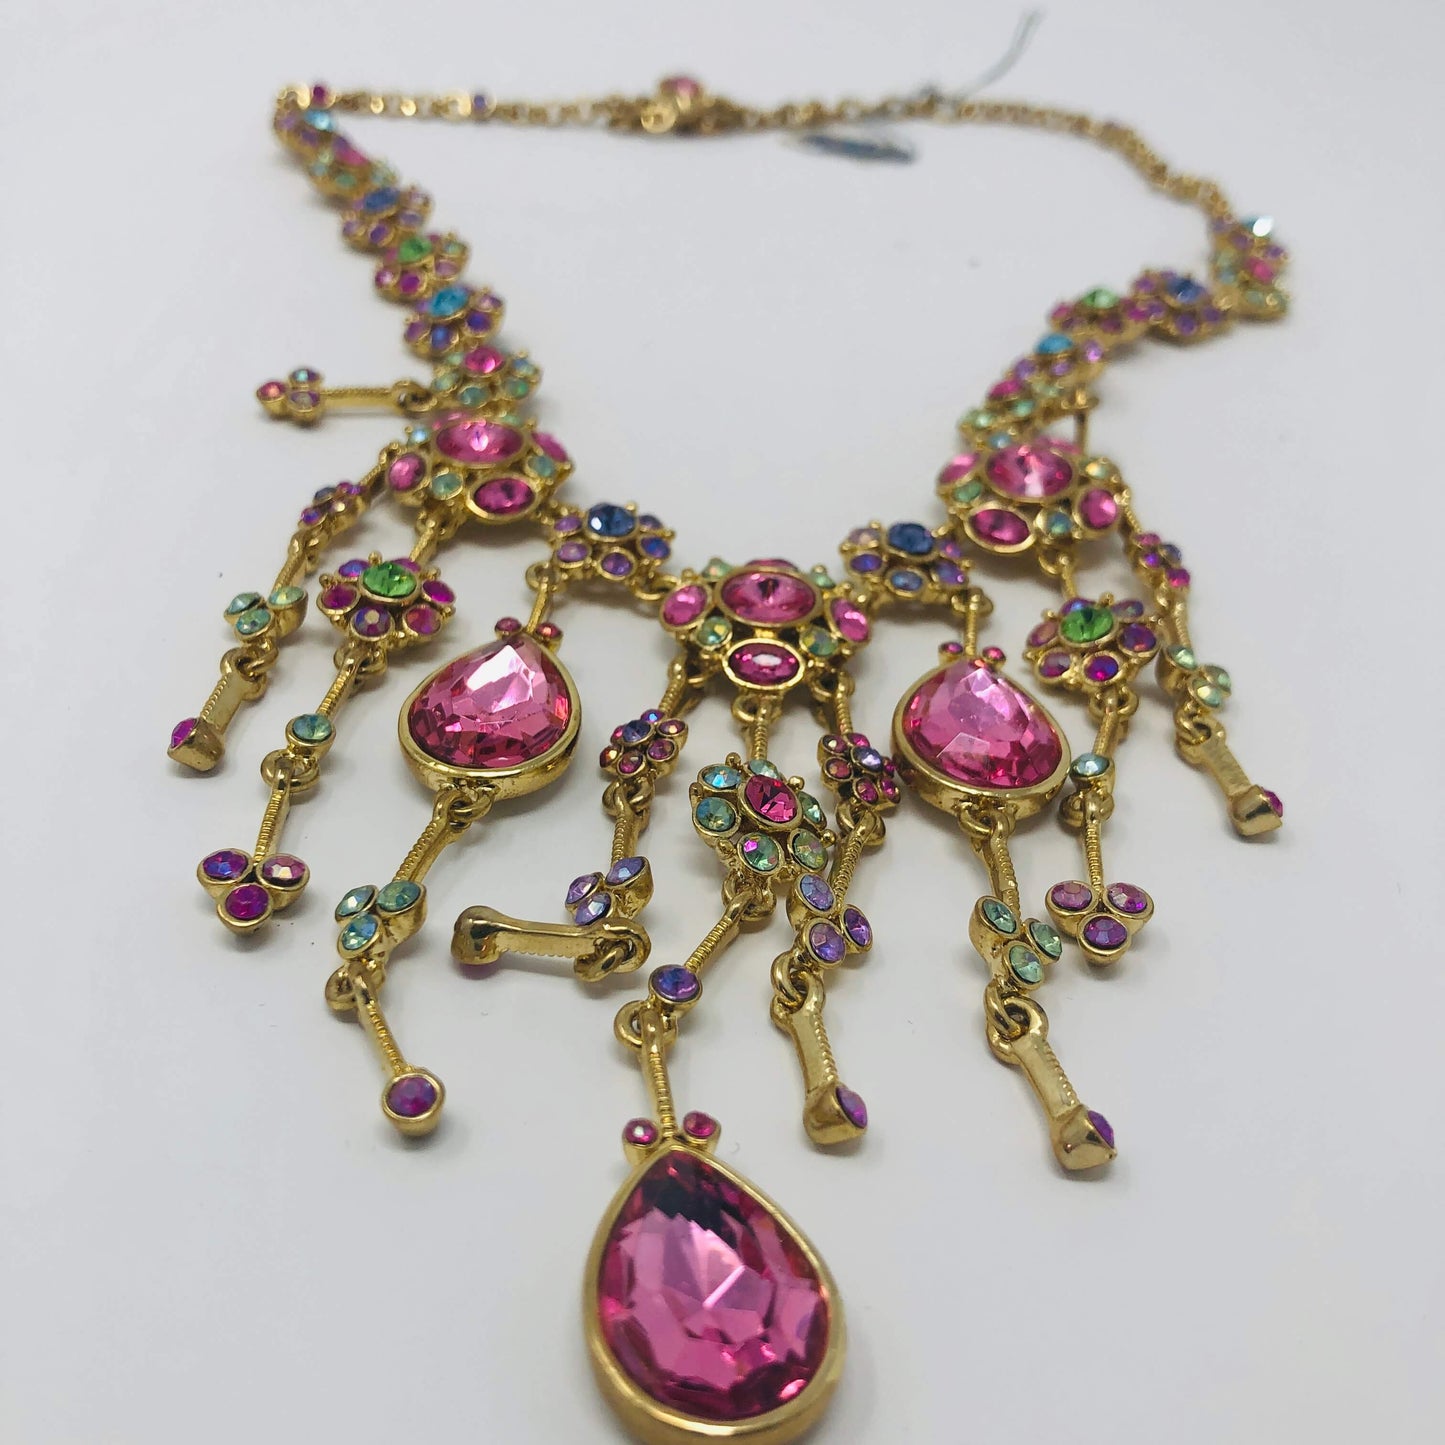 Decorated Golden Chain - Rofial Beauty